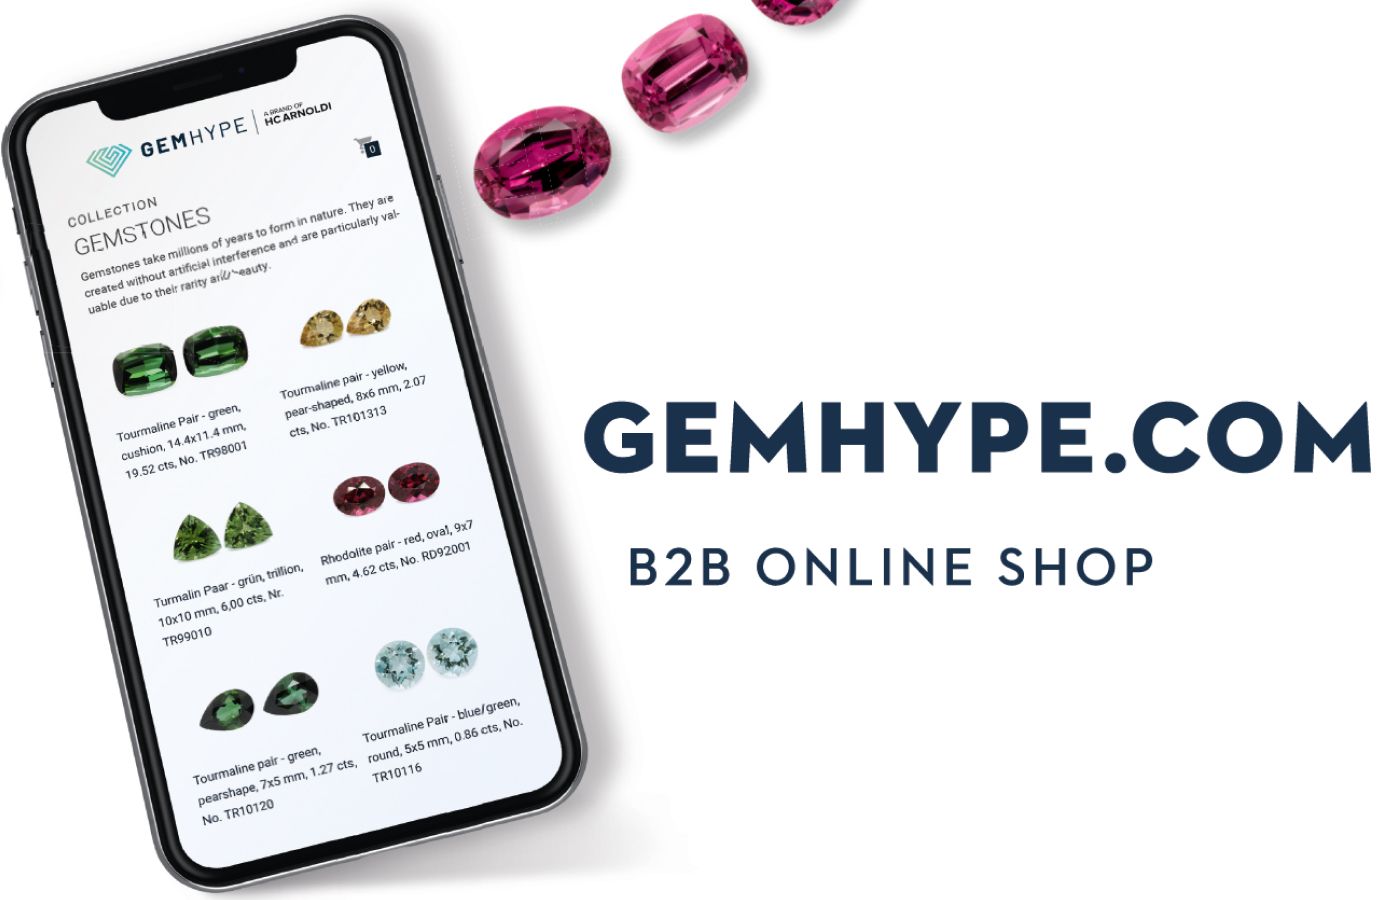 Free registration at gemhype.com → https://www.gemhype.com/account/login